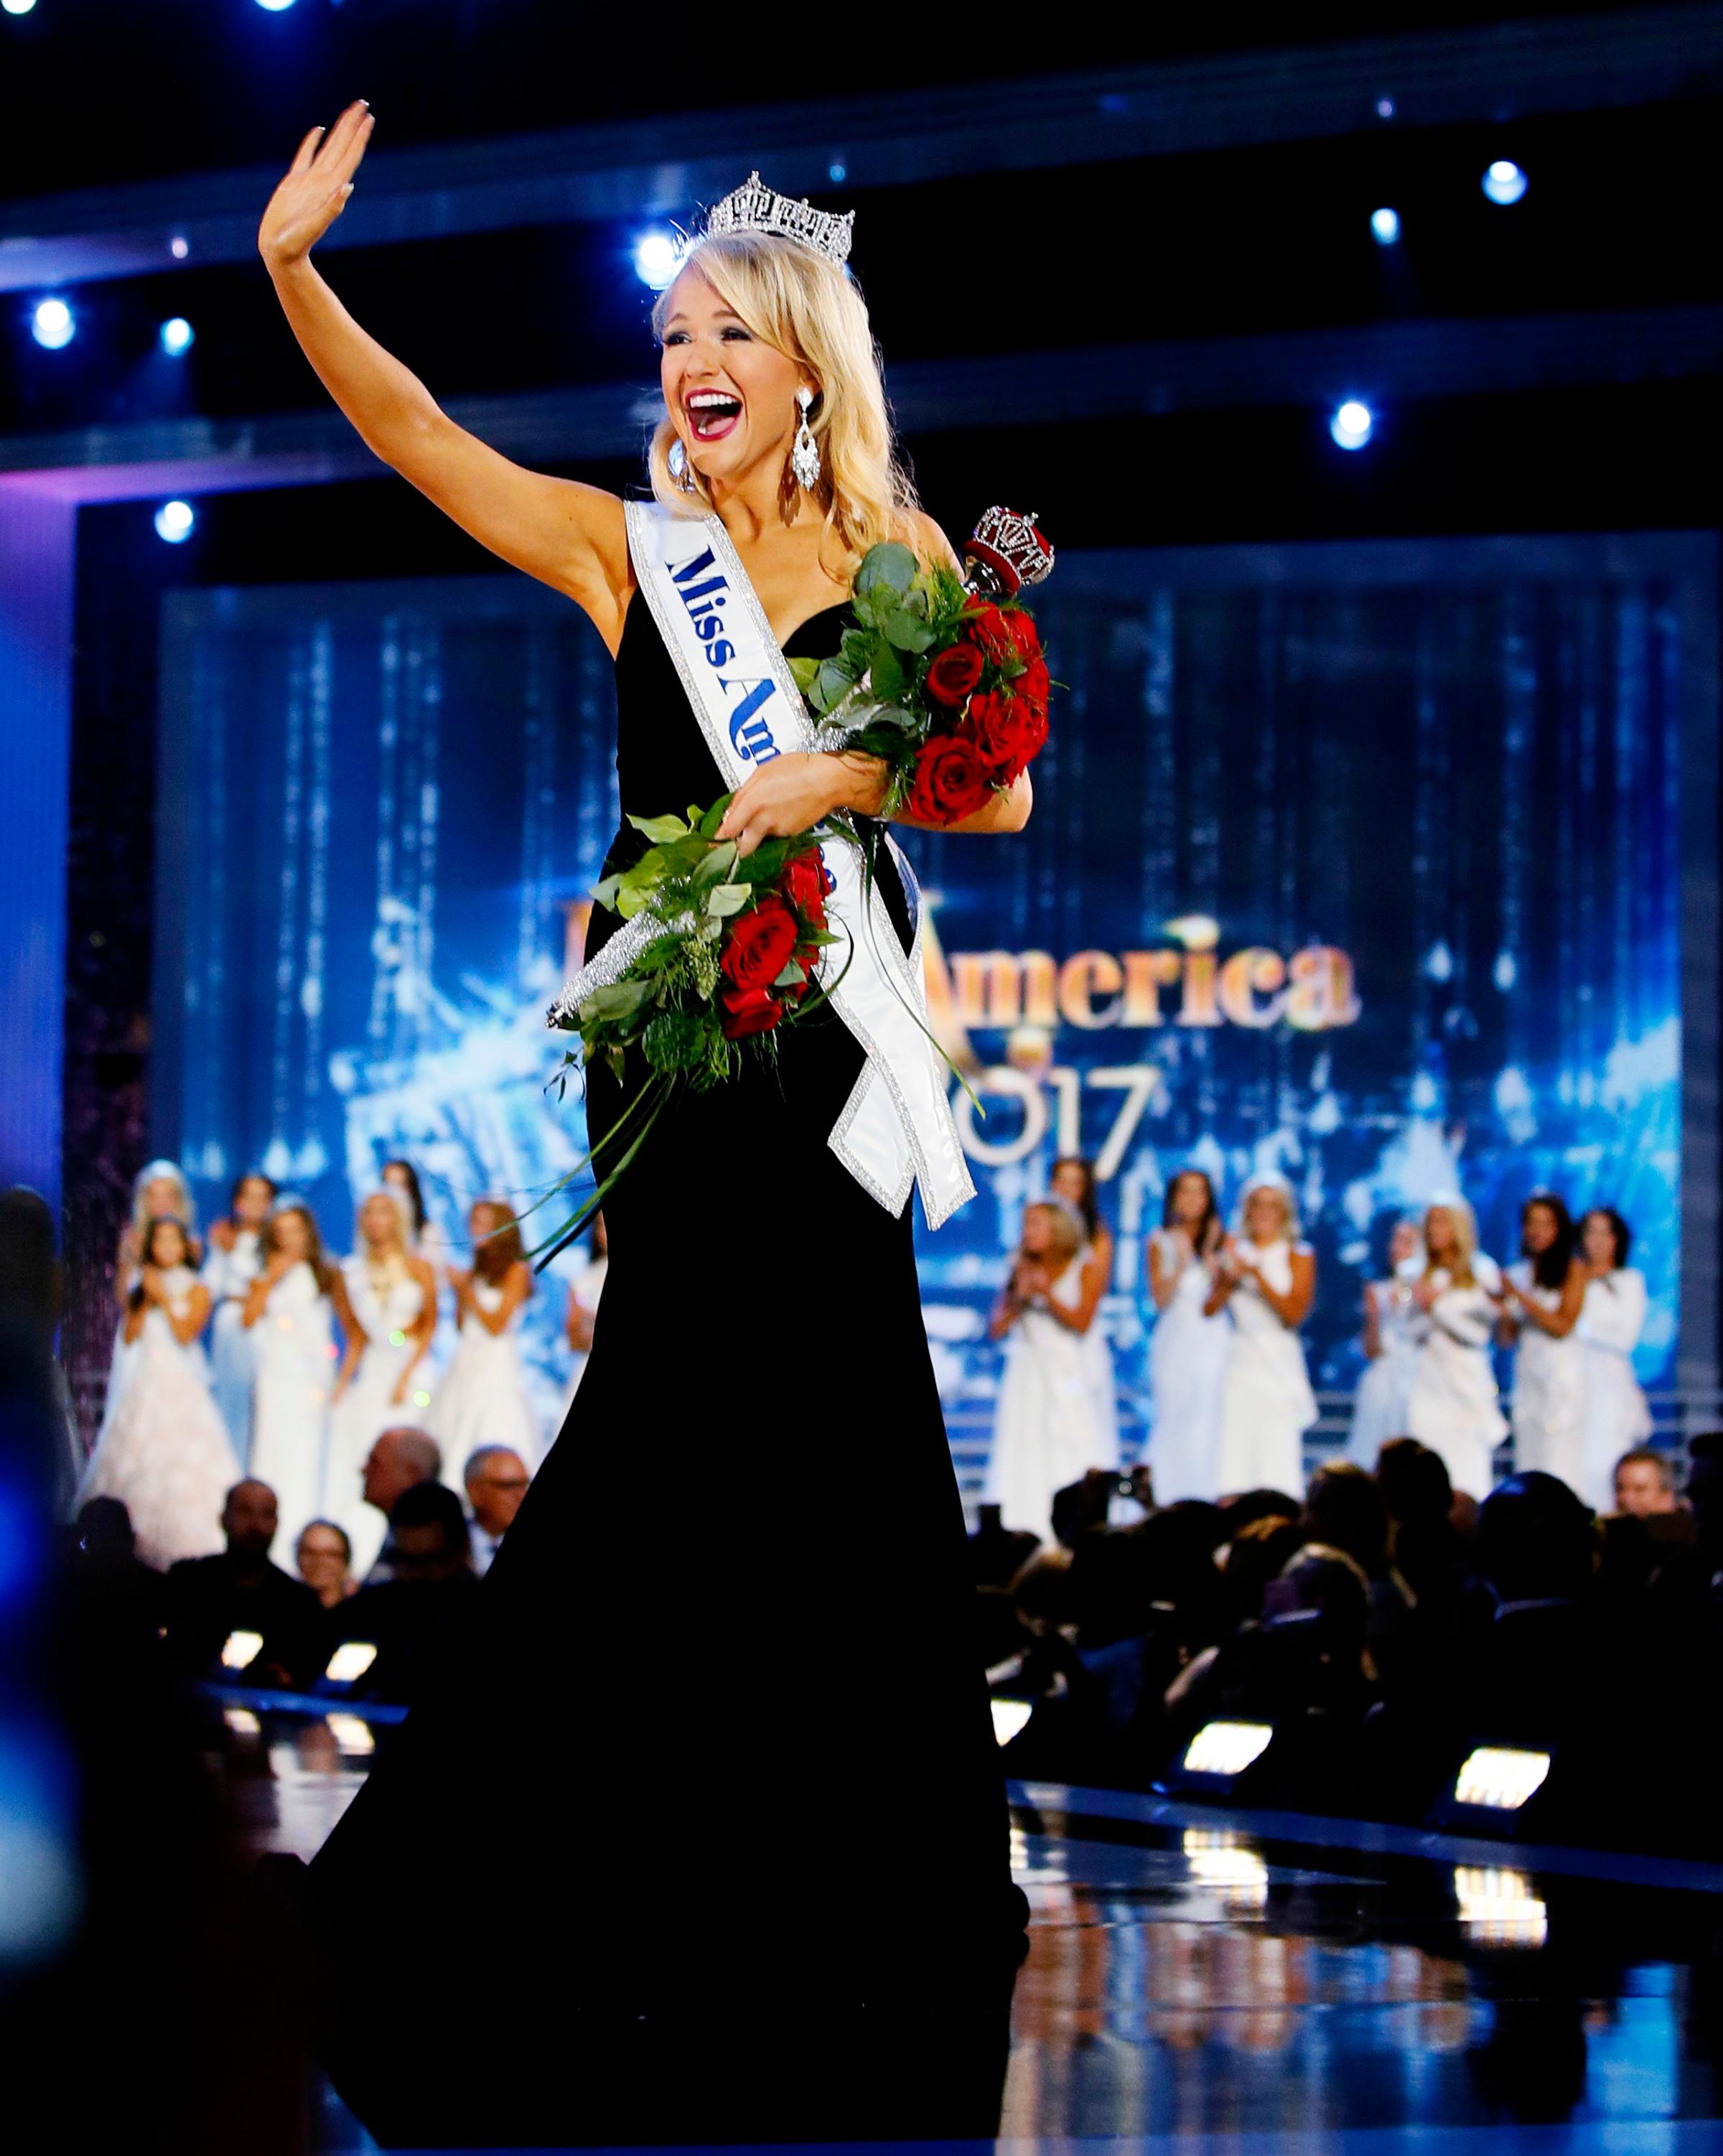 Miss Arkansa, Savvy Shields, waves to crowd after being named new the Miss America 2017 in Atlantic City, N.J., Sept. 11, 2016.